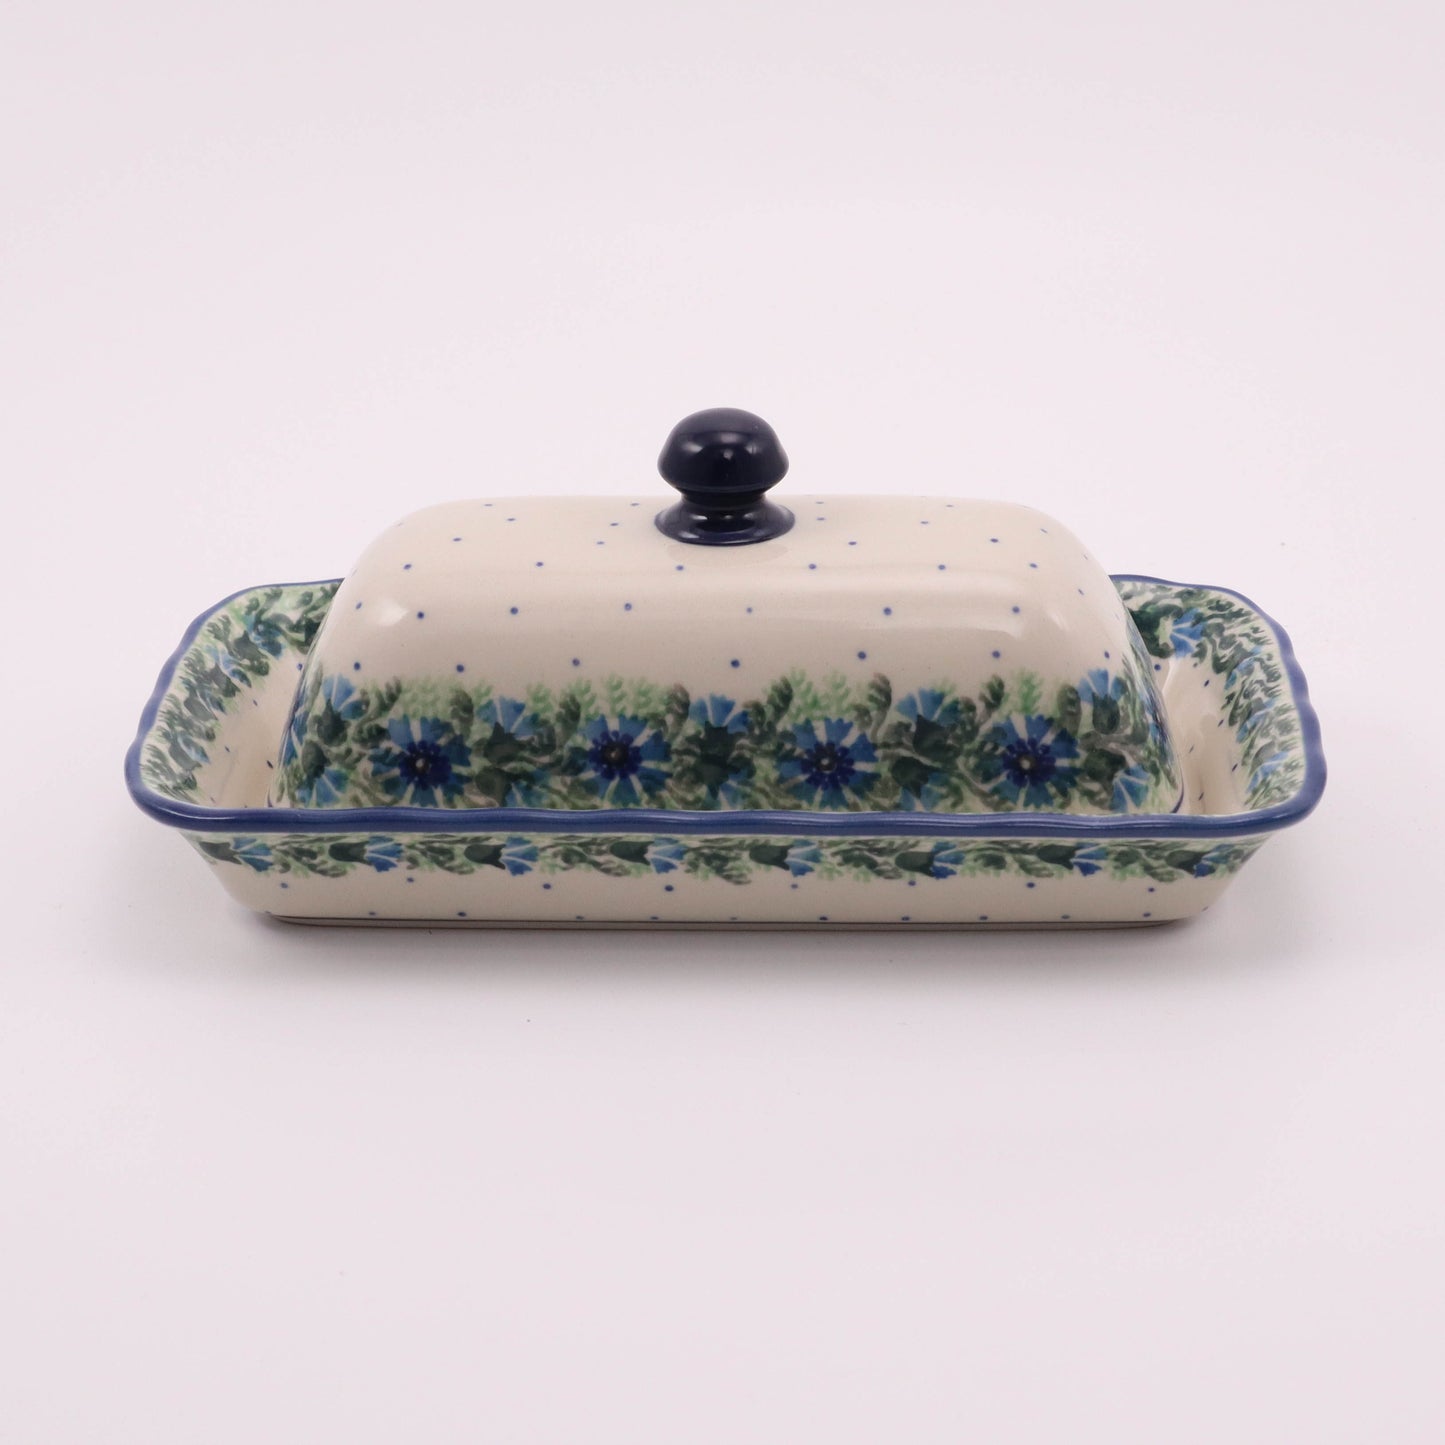 9"x5"x3" Covered Butter Dish. Pattern: 27